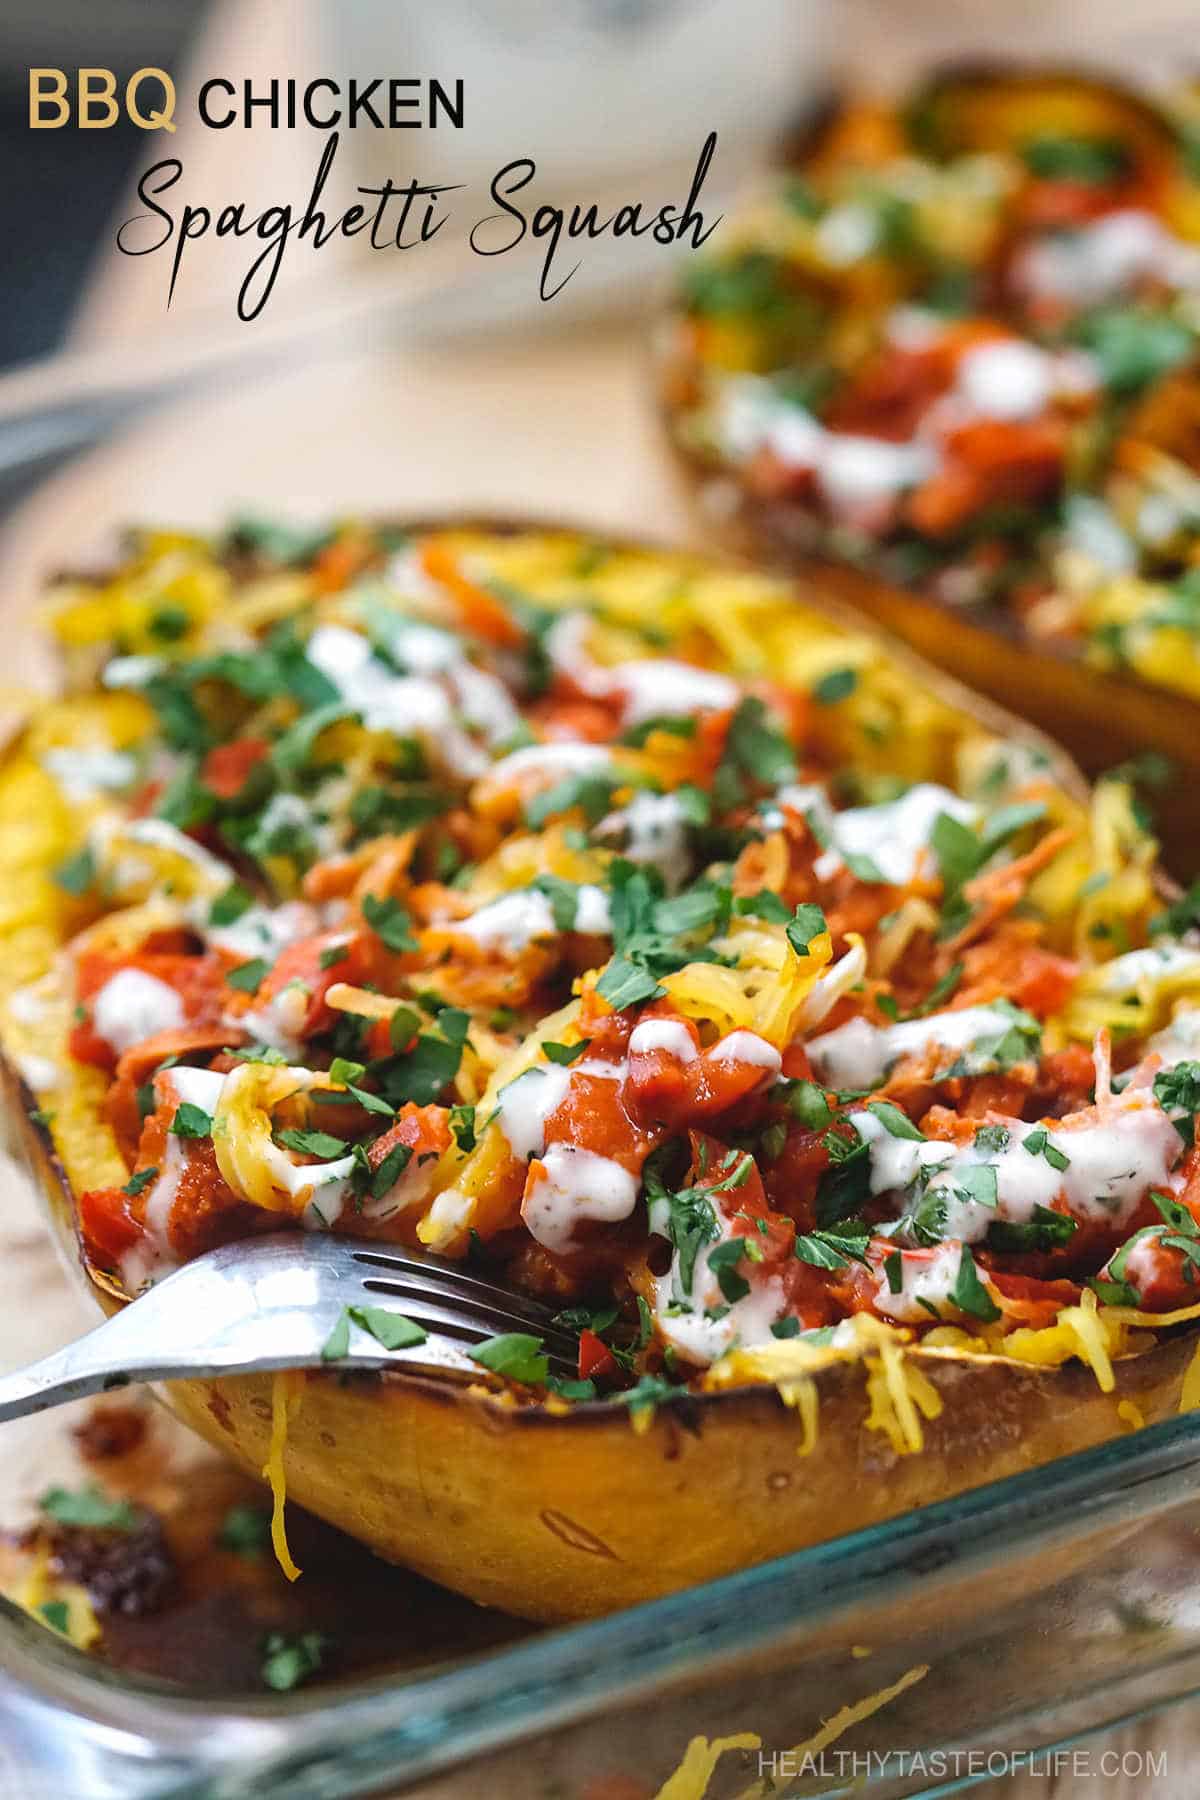 BBQ chicken stuffed spaghetti squash boats – no cheese, dairy free healthy dinner or lunch recipe. Oven baked spaghetti squash stuffed with chicken breast and tossed in a sweet and tangy BBQ  sauce  and finished with a drizzle of creamy dairy free ranch sauce. #bbqchickenspaghettisquash #dairyfreespaghettisquash #spaghettisquashwithoutcheese #bbqspaghettisquash #healthydinner